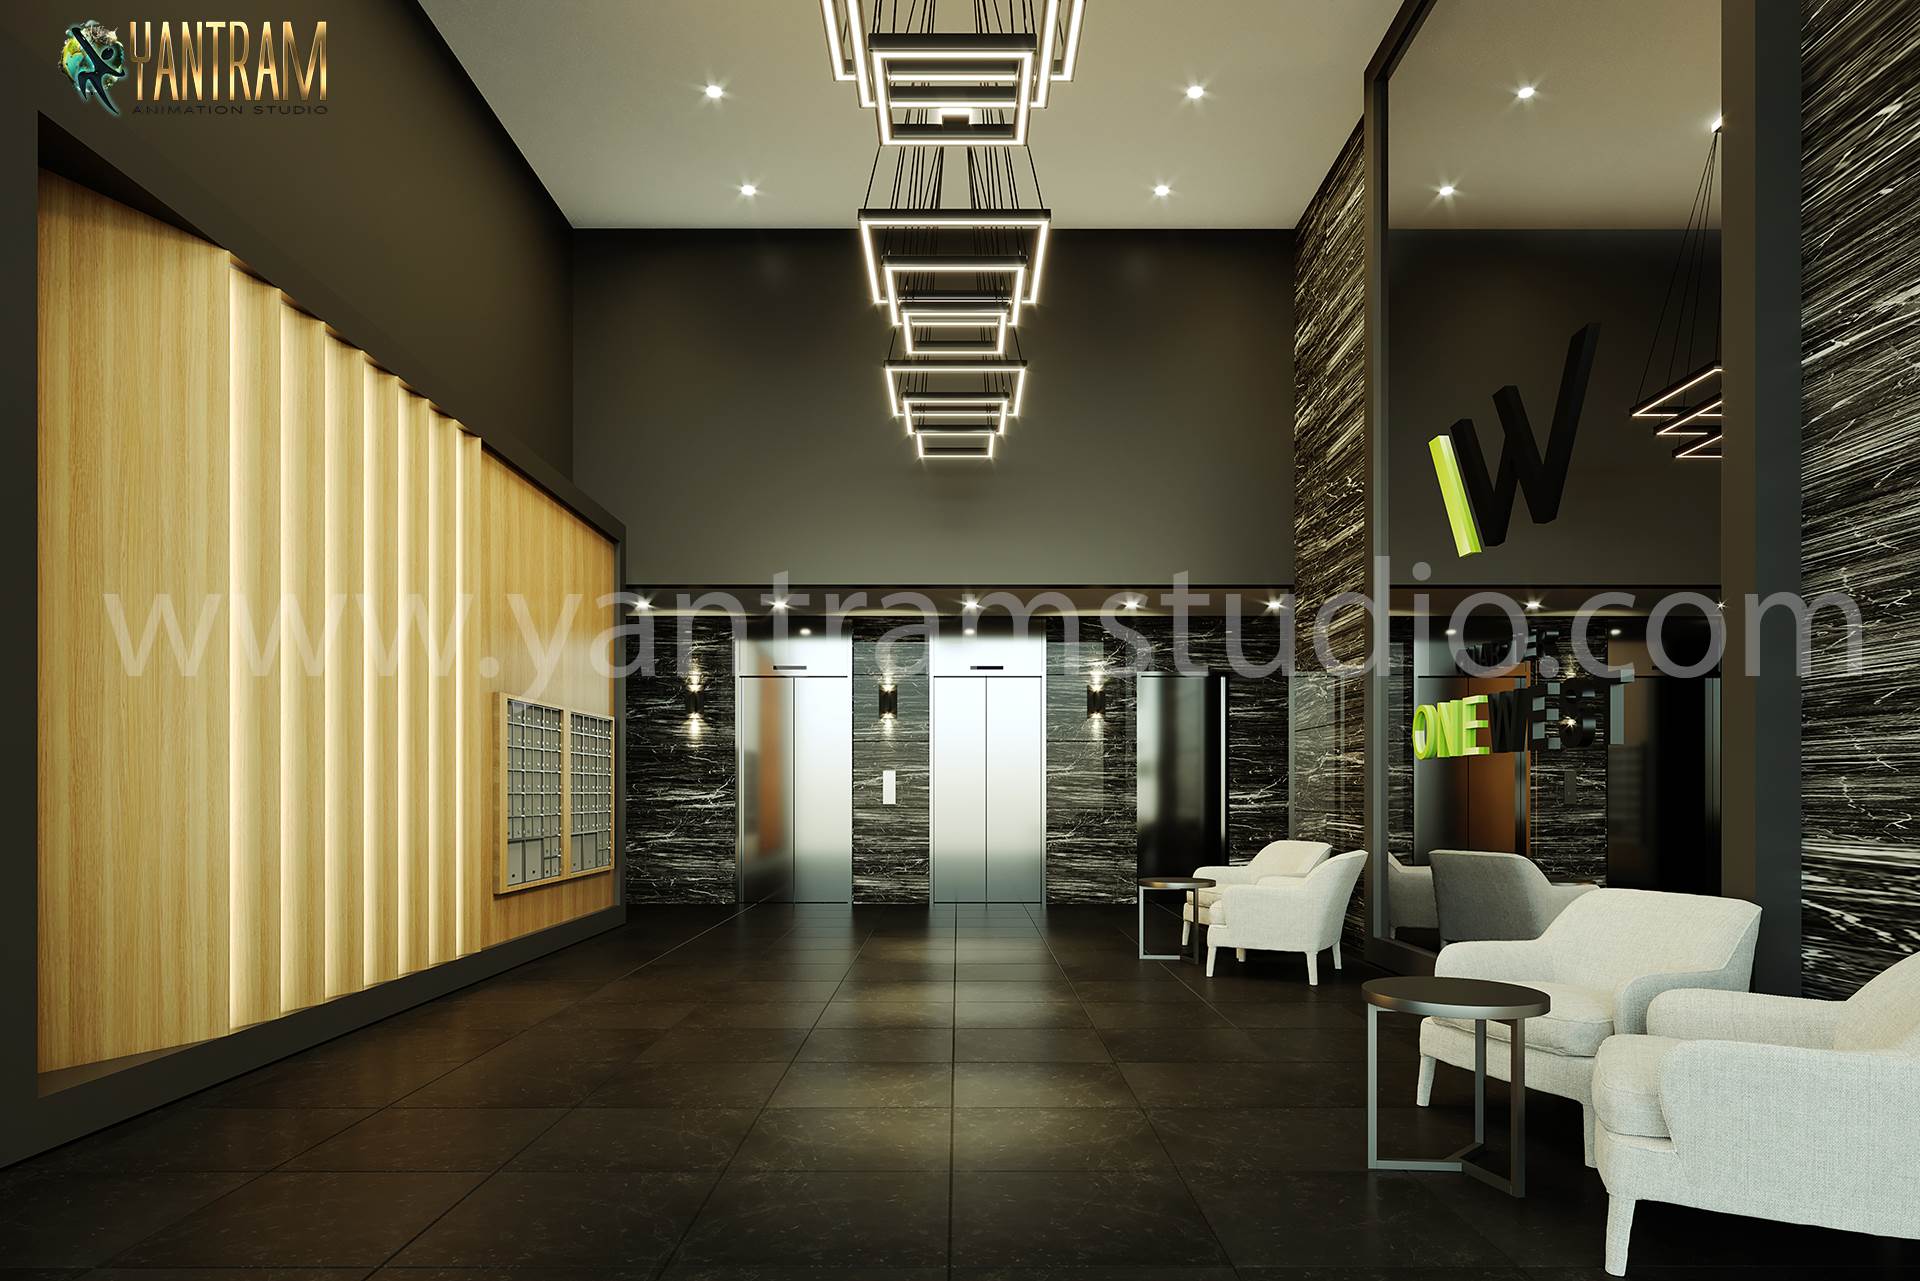 3d interior design rendering views of the lobby, kitchen, gym, bathroom, pool by Architectural Design Studio 2021, Chicago - Illinois